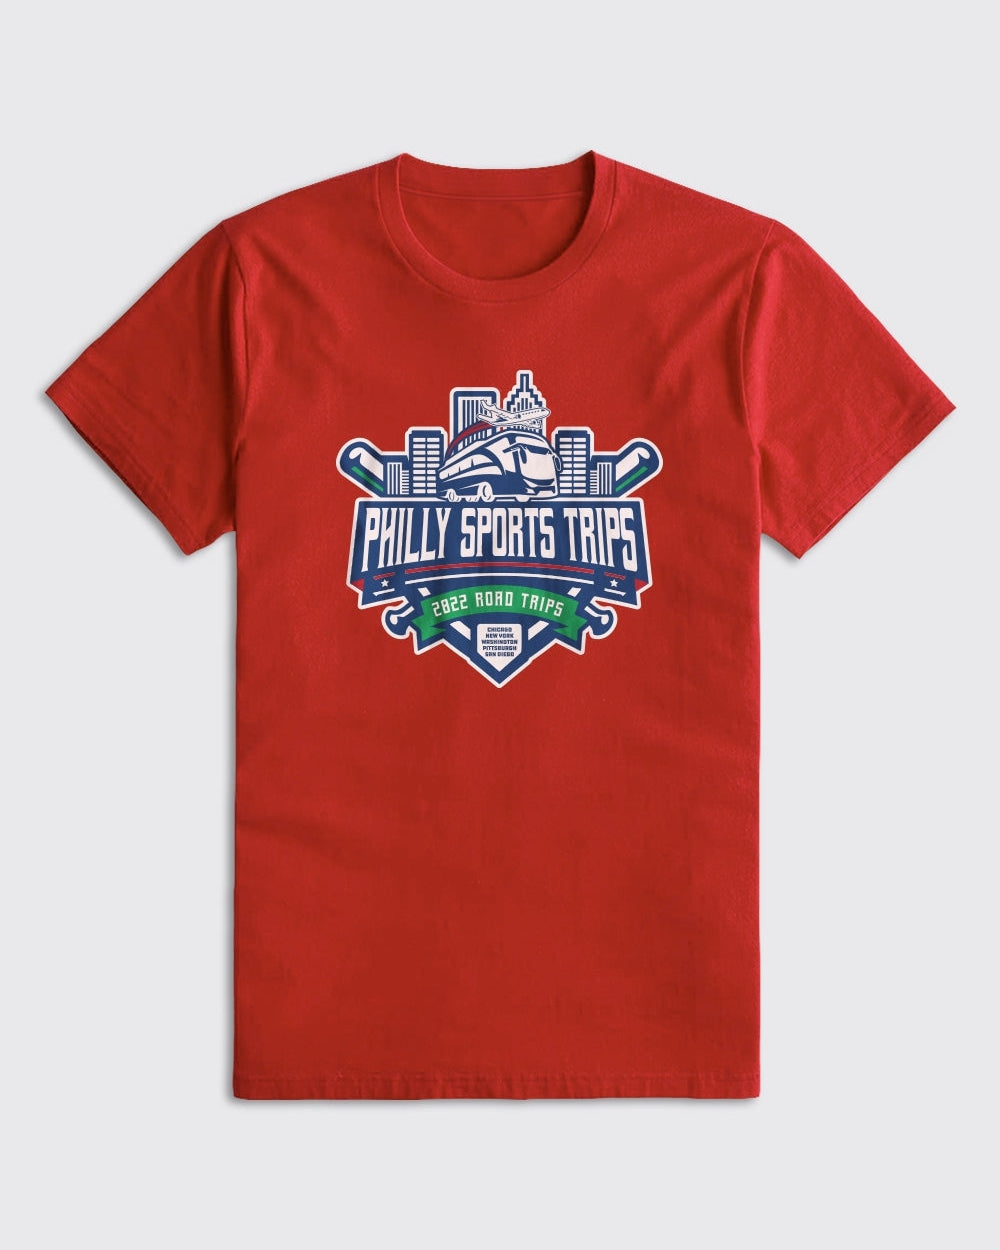 PST Phillies 2022 Road Trips Shirt - Philly Sports Trips - Philly Sports Shirts